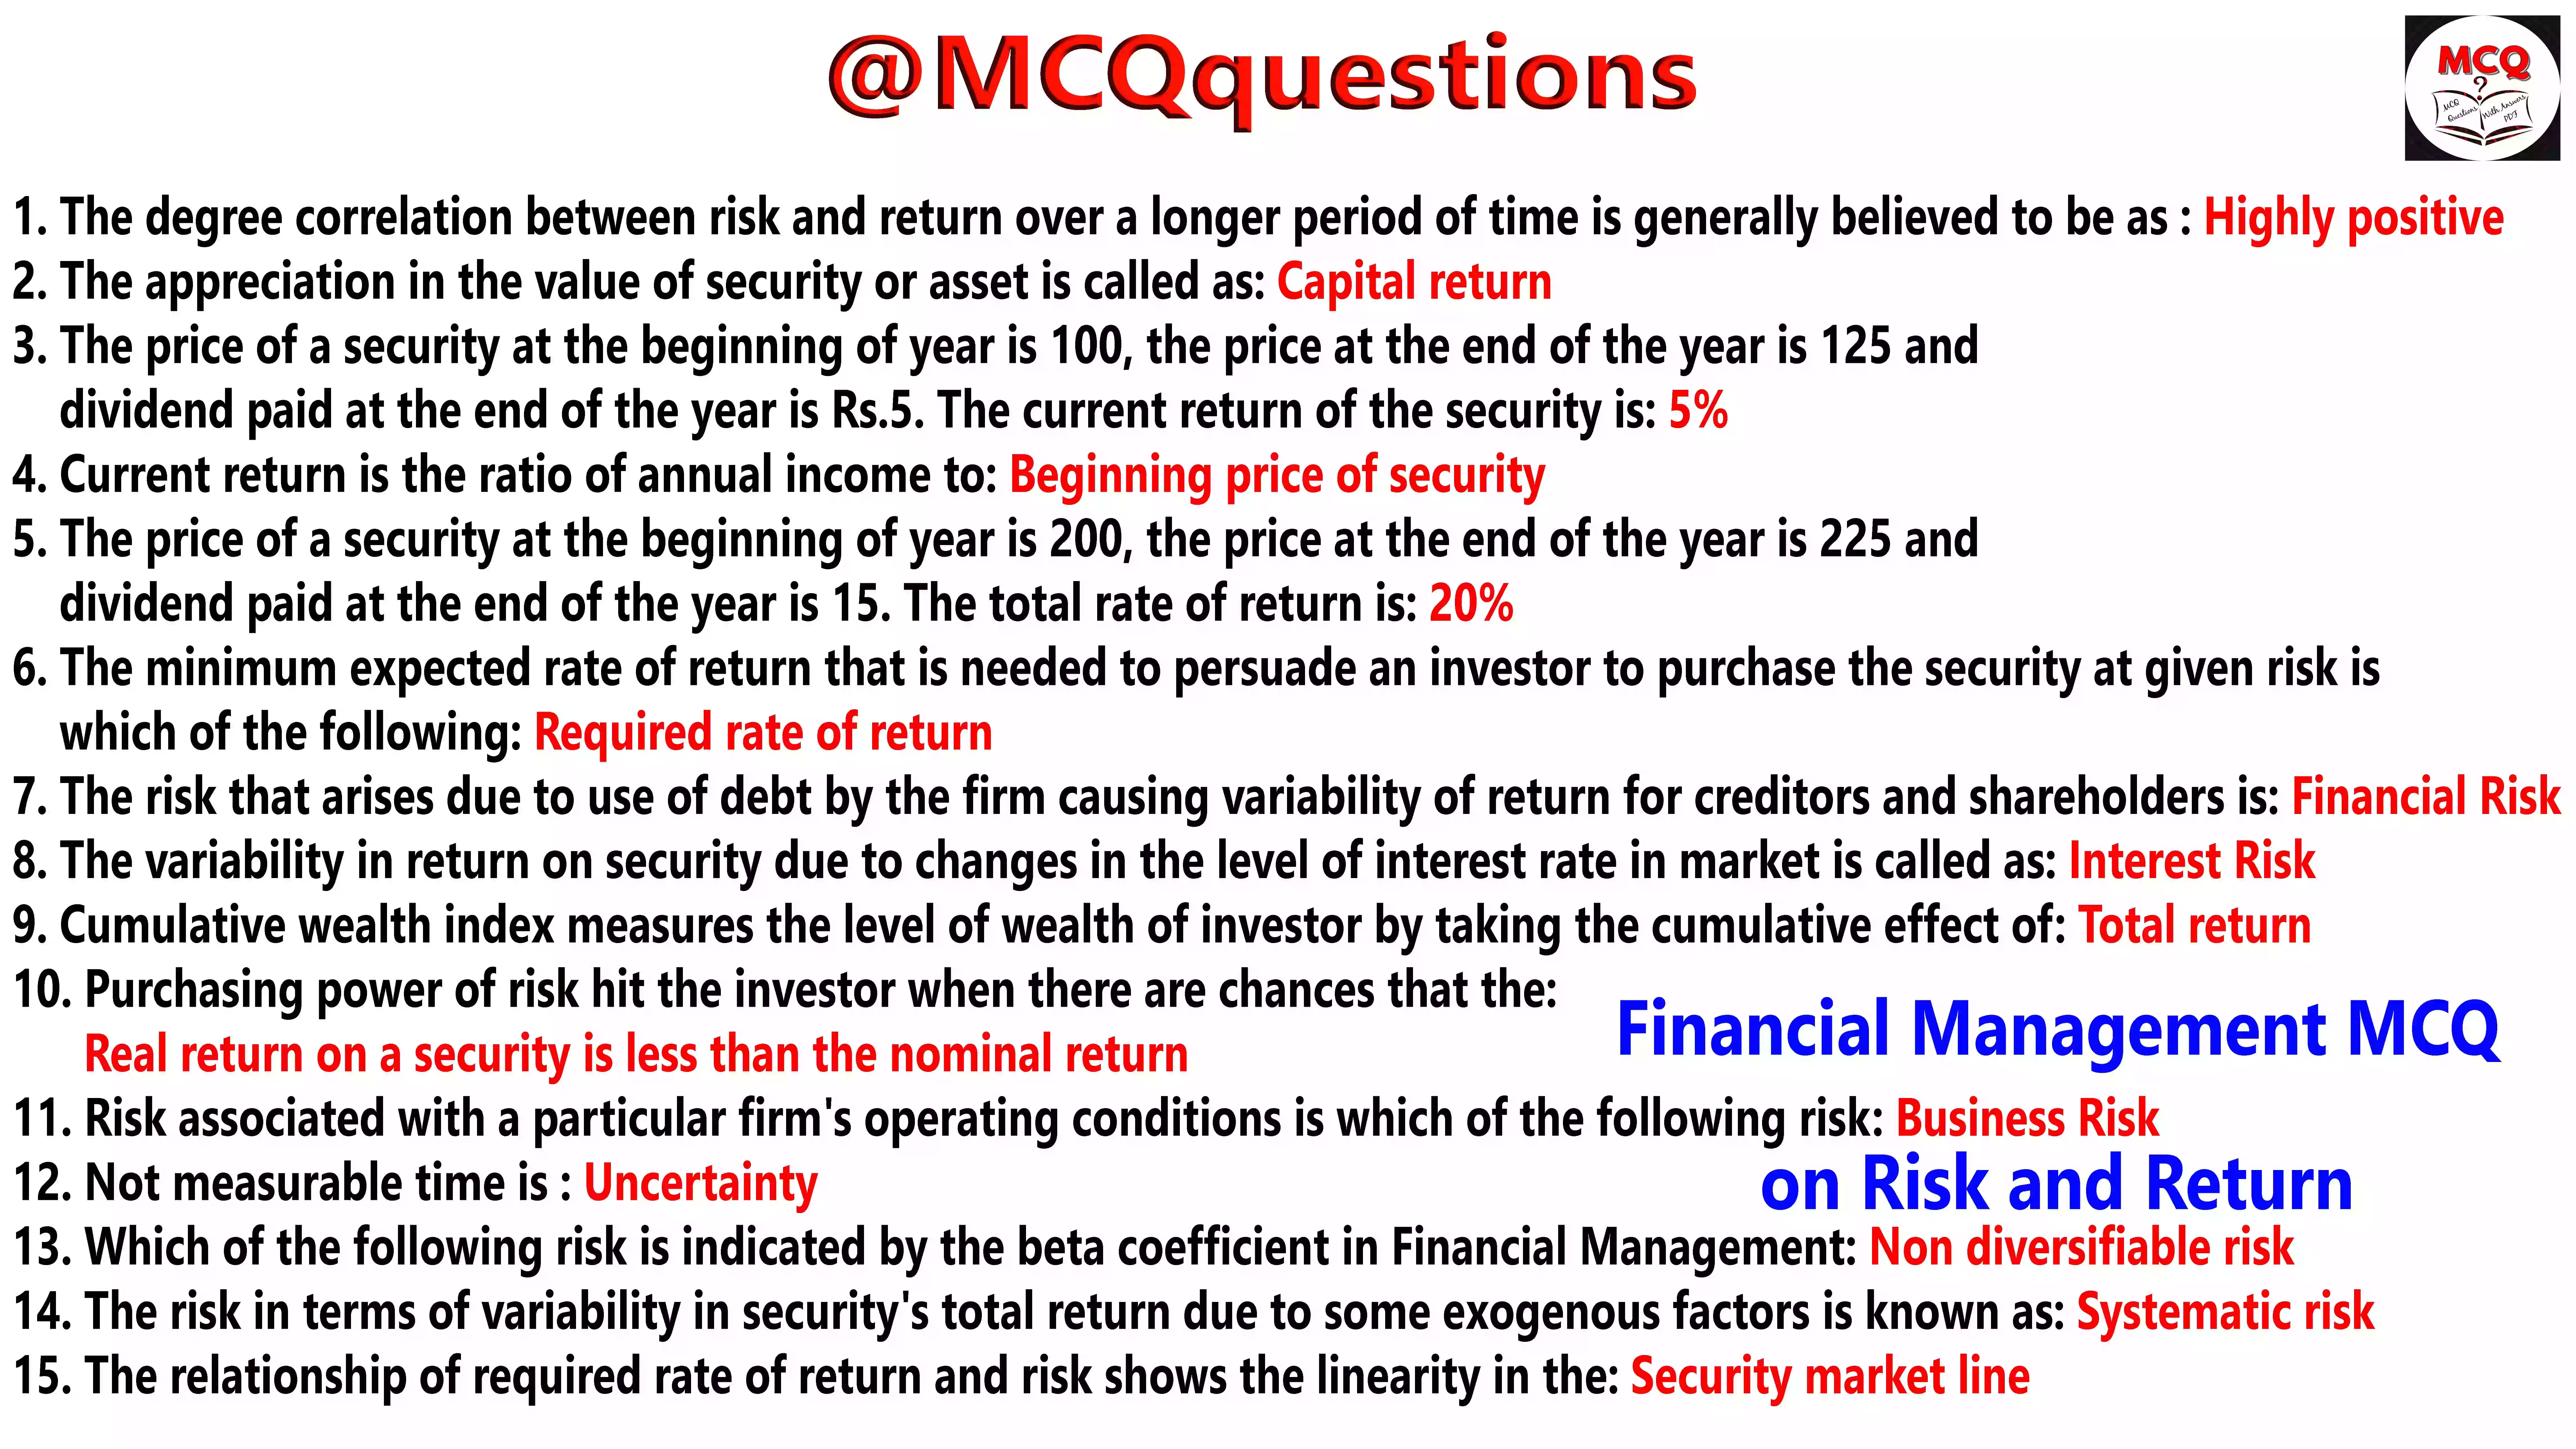 Financial Management MCQ on Risk and Return